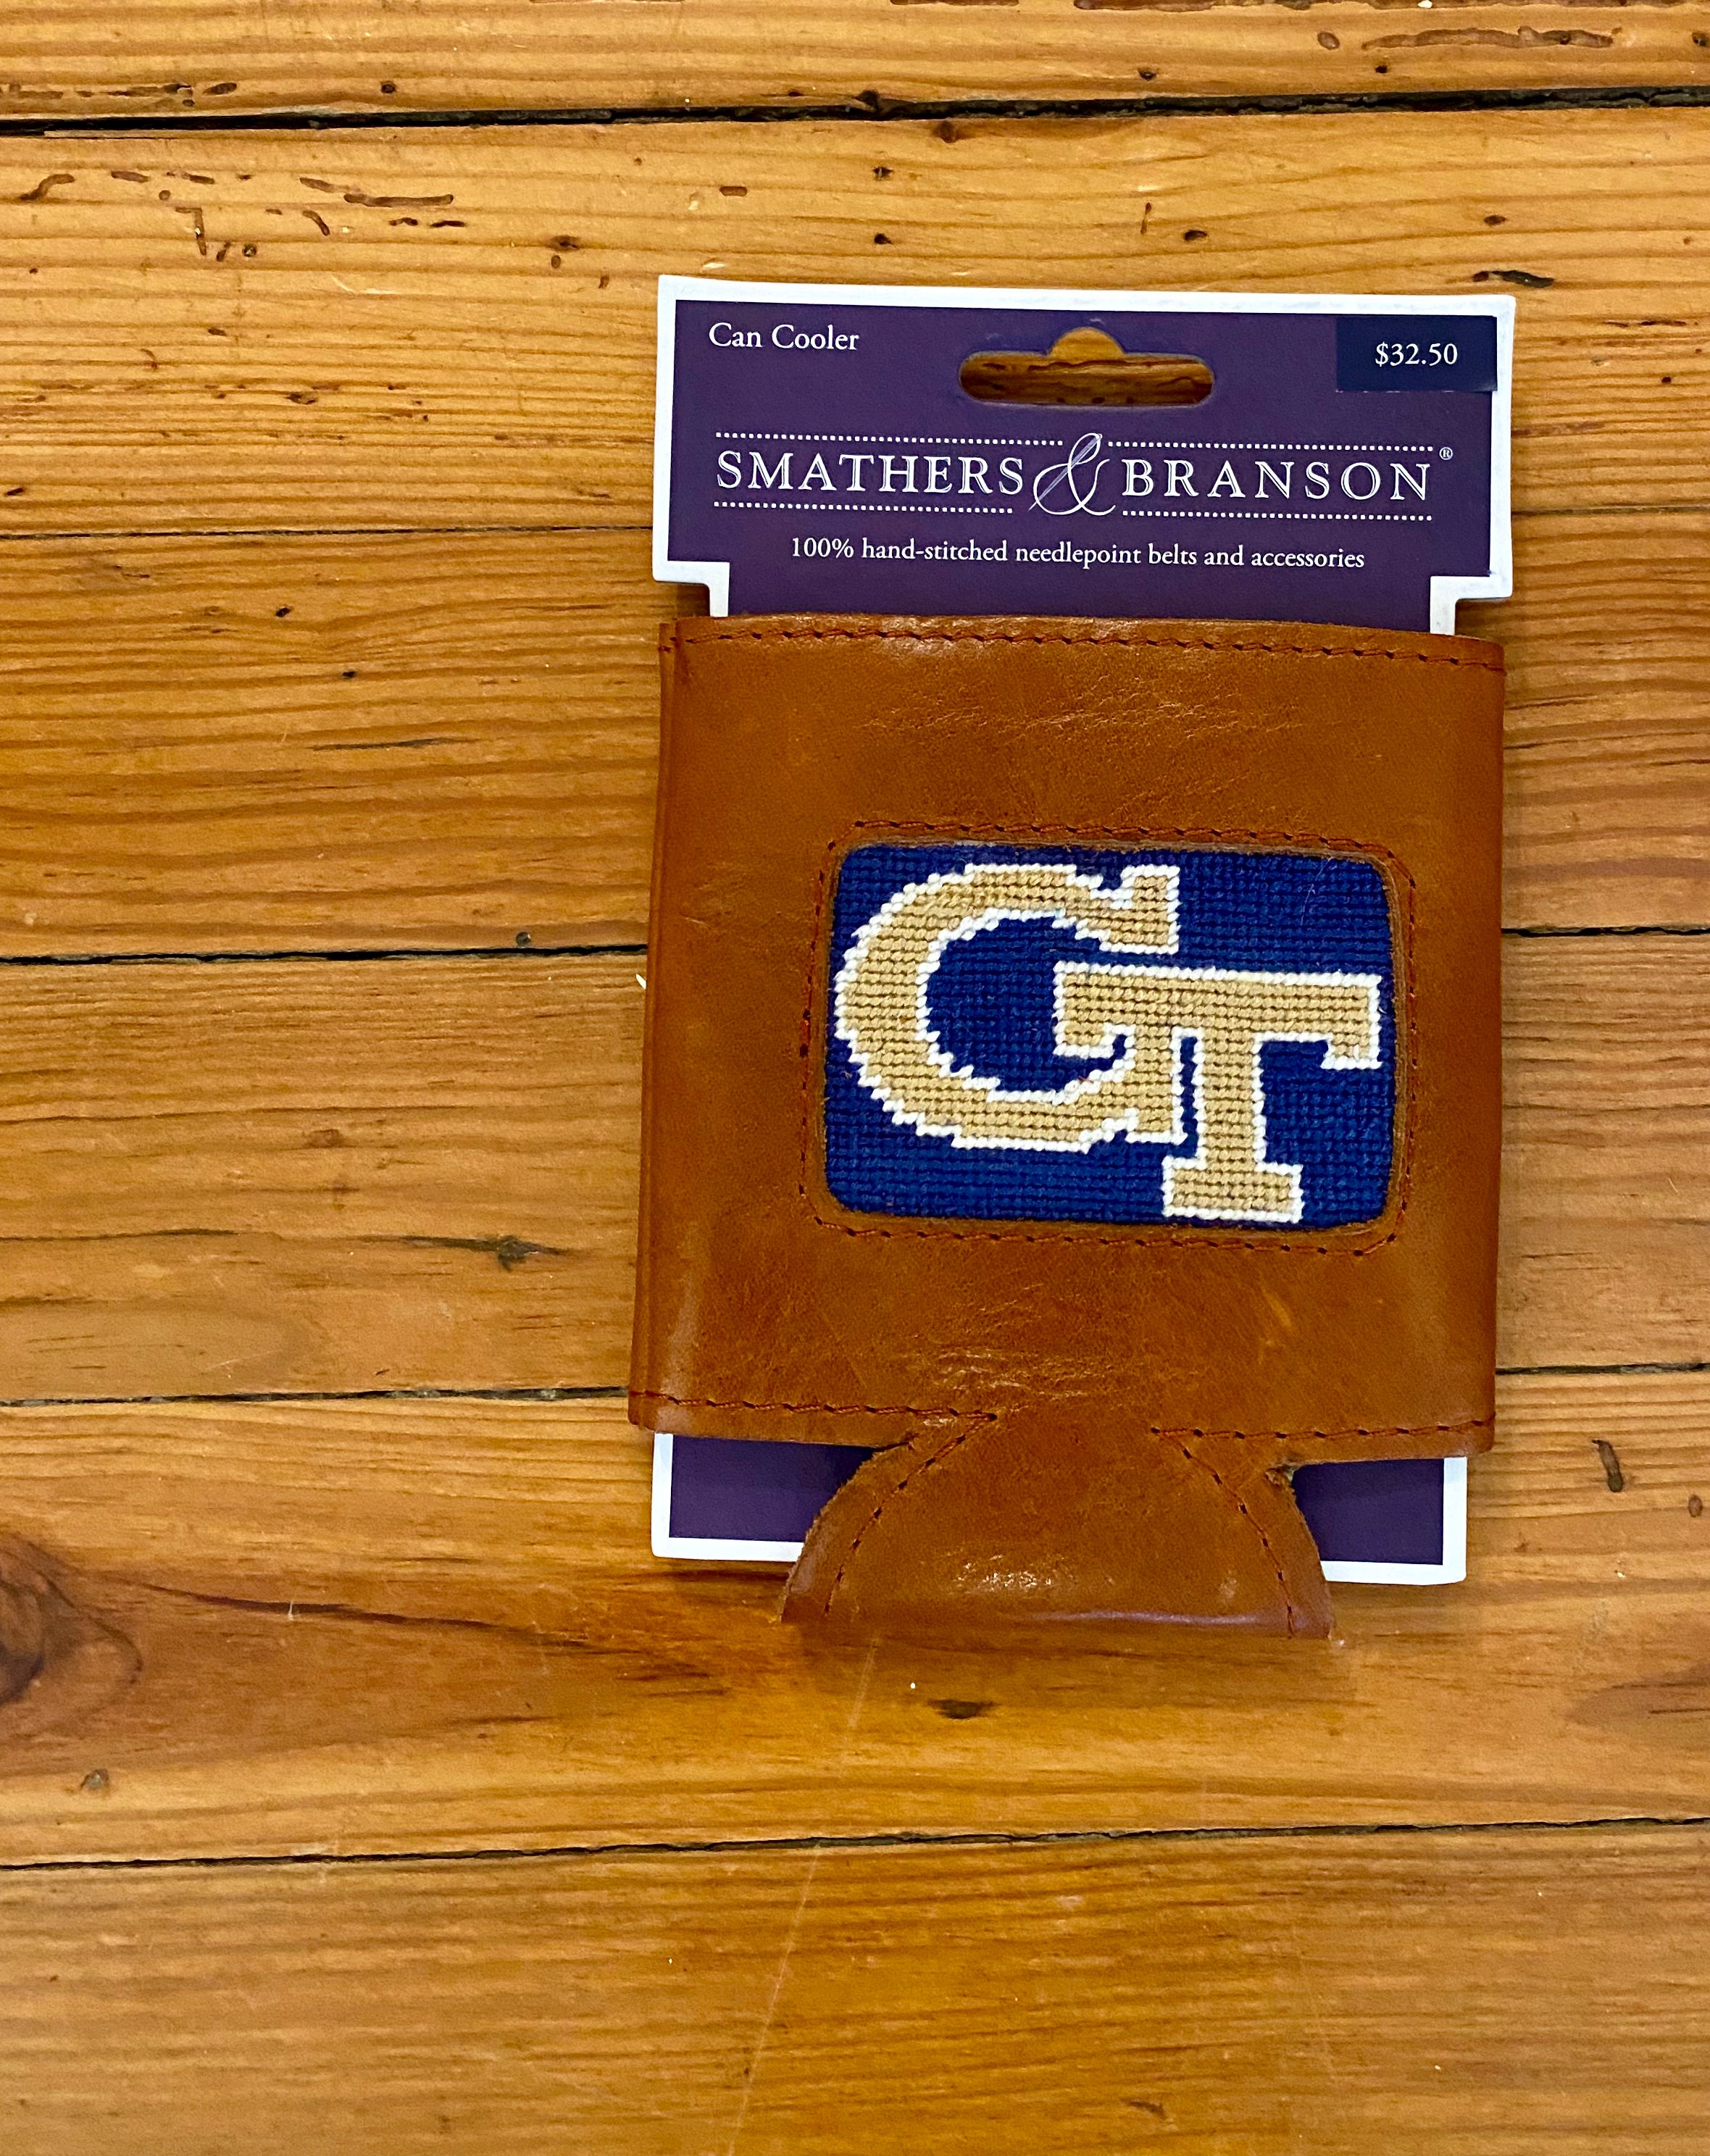 gt smathers and branson can cooler